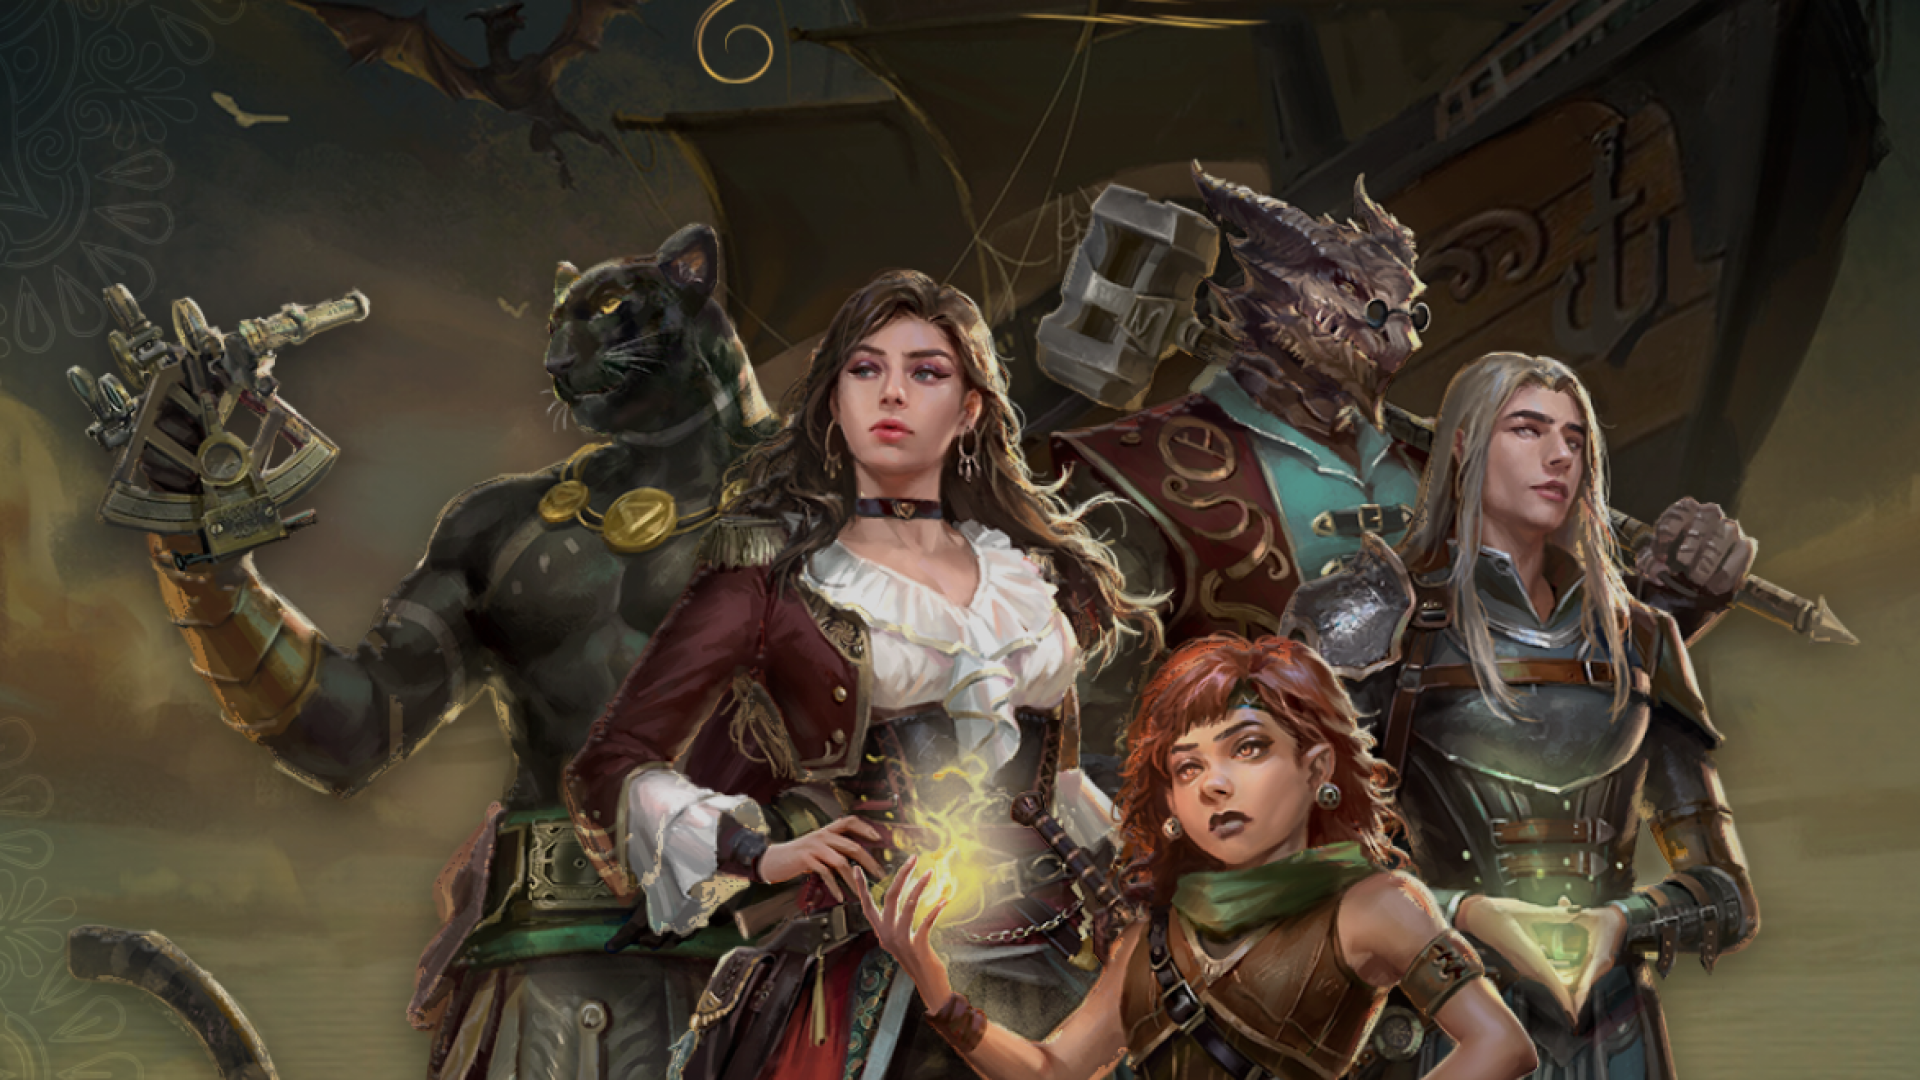 Image for Dragonlance author announces new D&D 5E campaign setting full of sky pirates and airships